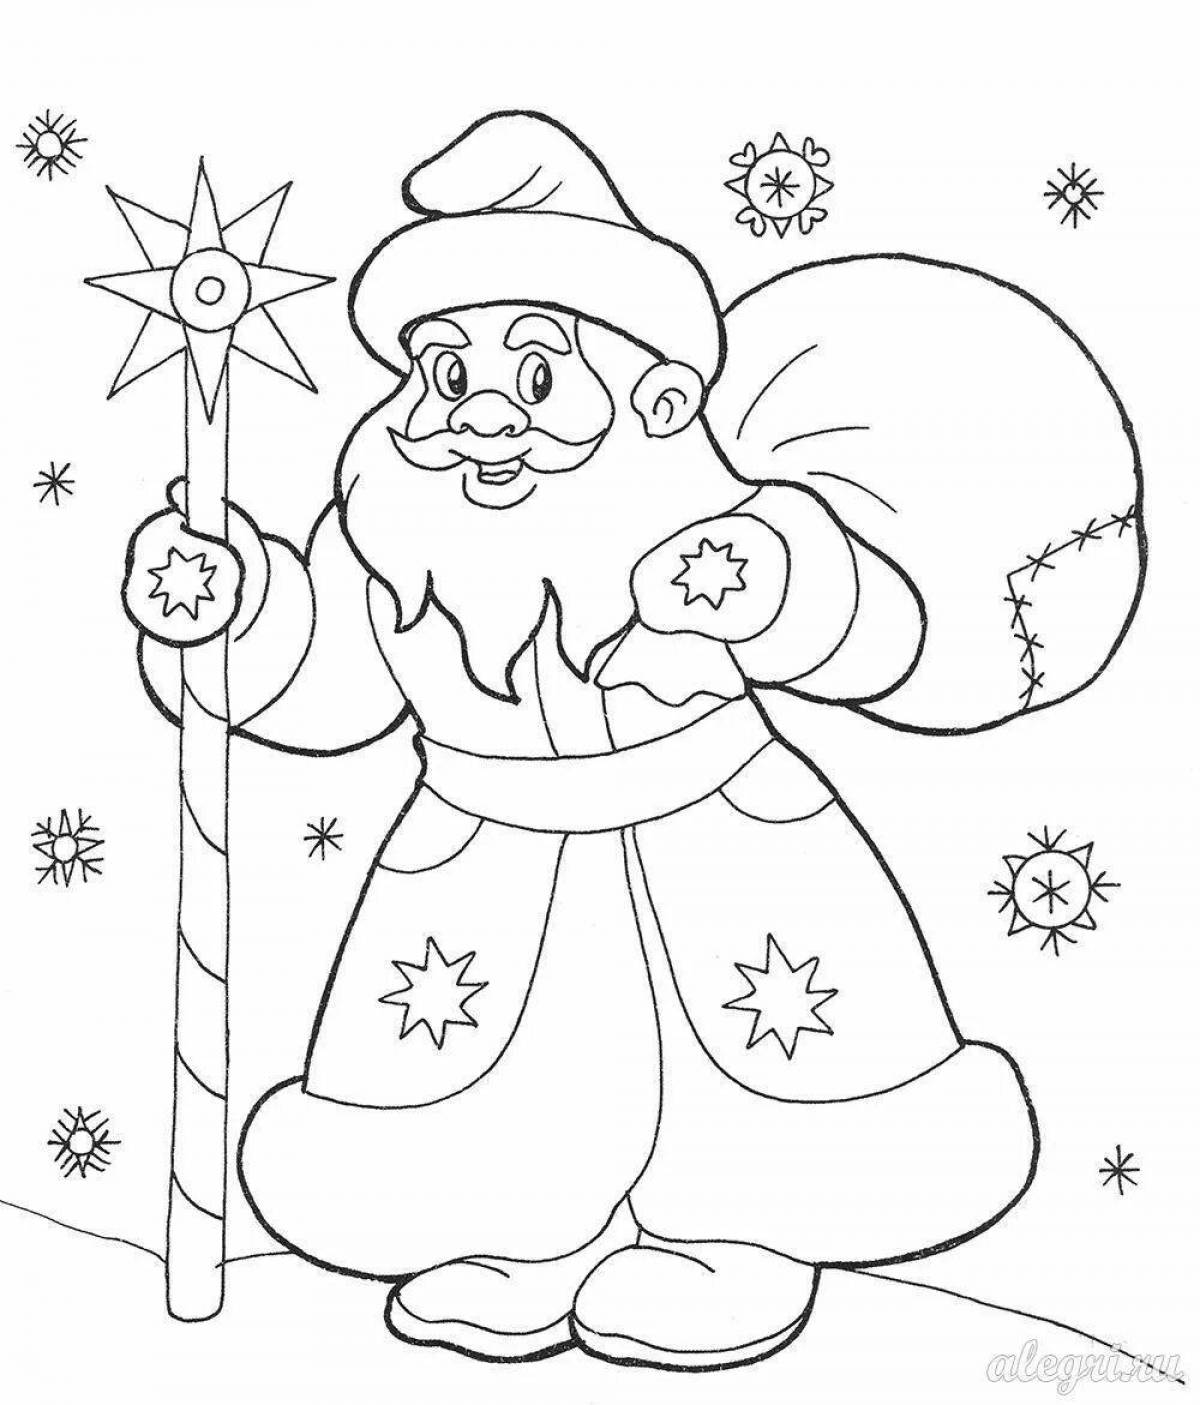 Bright coloring Christmas pictures